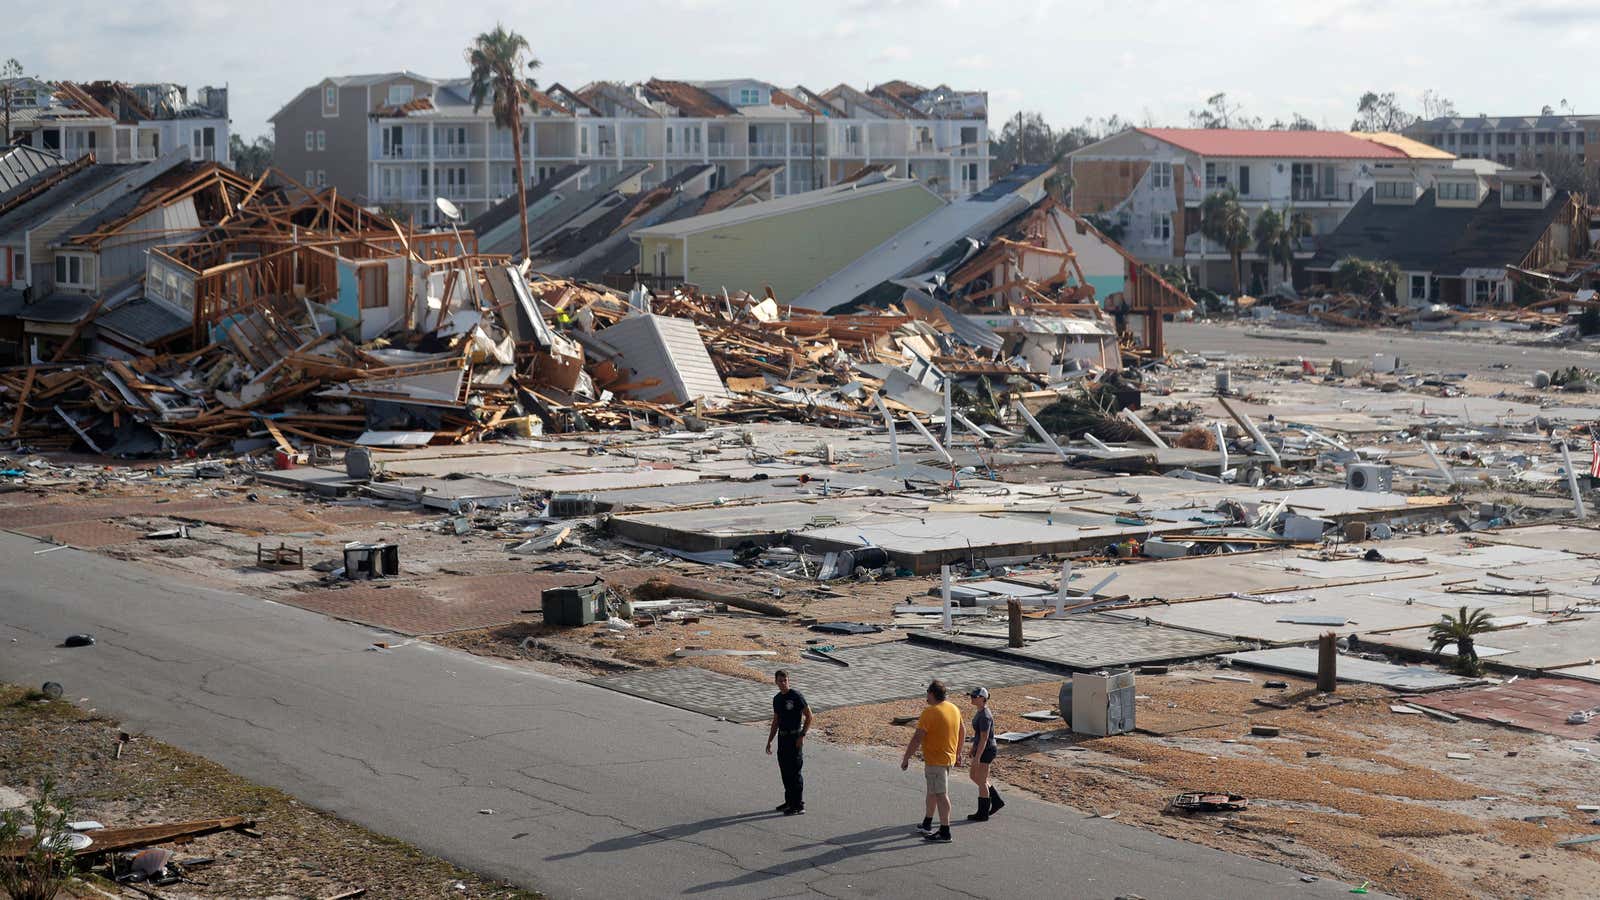 Rescuers perform a search in the aftermath of Hurricane Michael in Mexico Beach, Fla.